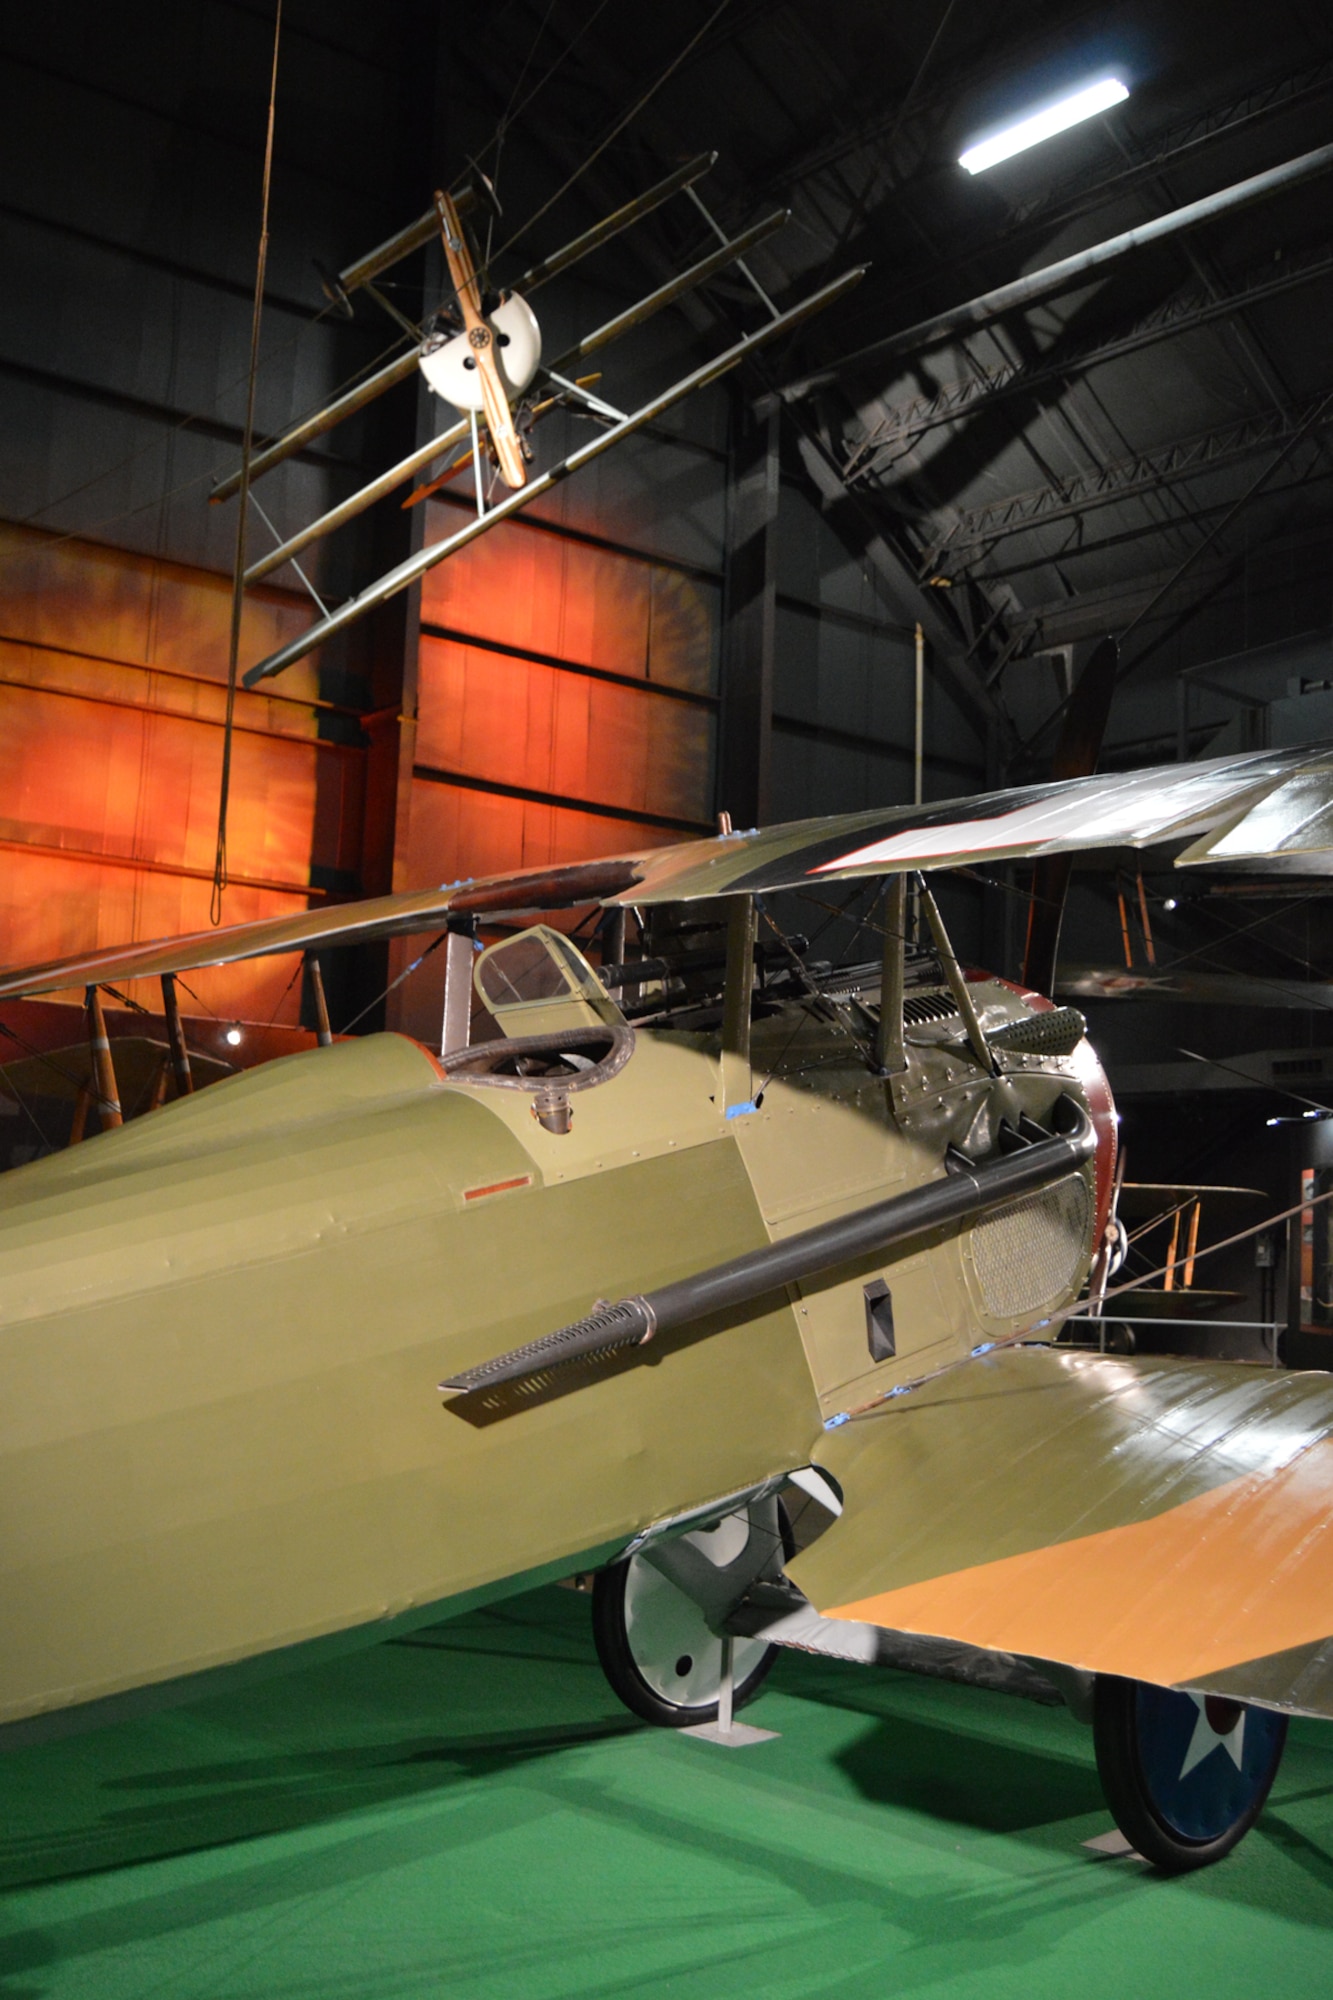 DAYTON, Ohio -- SPAD XIII in the Early Years Gallery at the National Museum of the United States Air Force. (U.S. Air Force photo) 